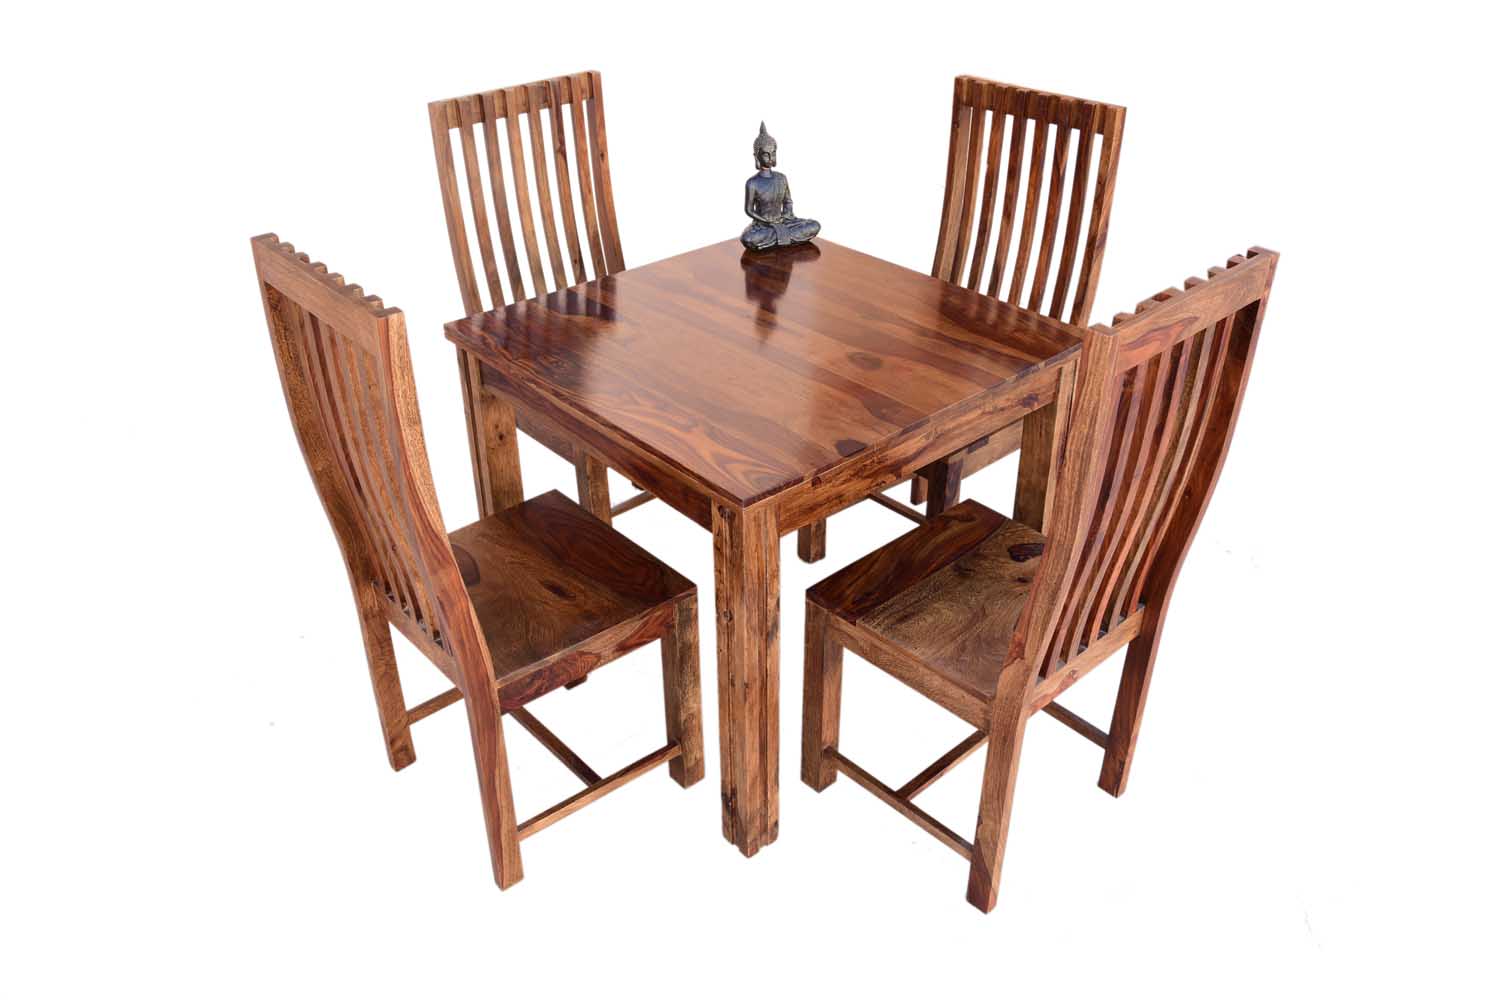 Buy 4 Seater Recto classic square dining table with zernal wooden chair